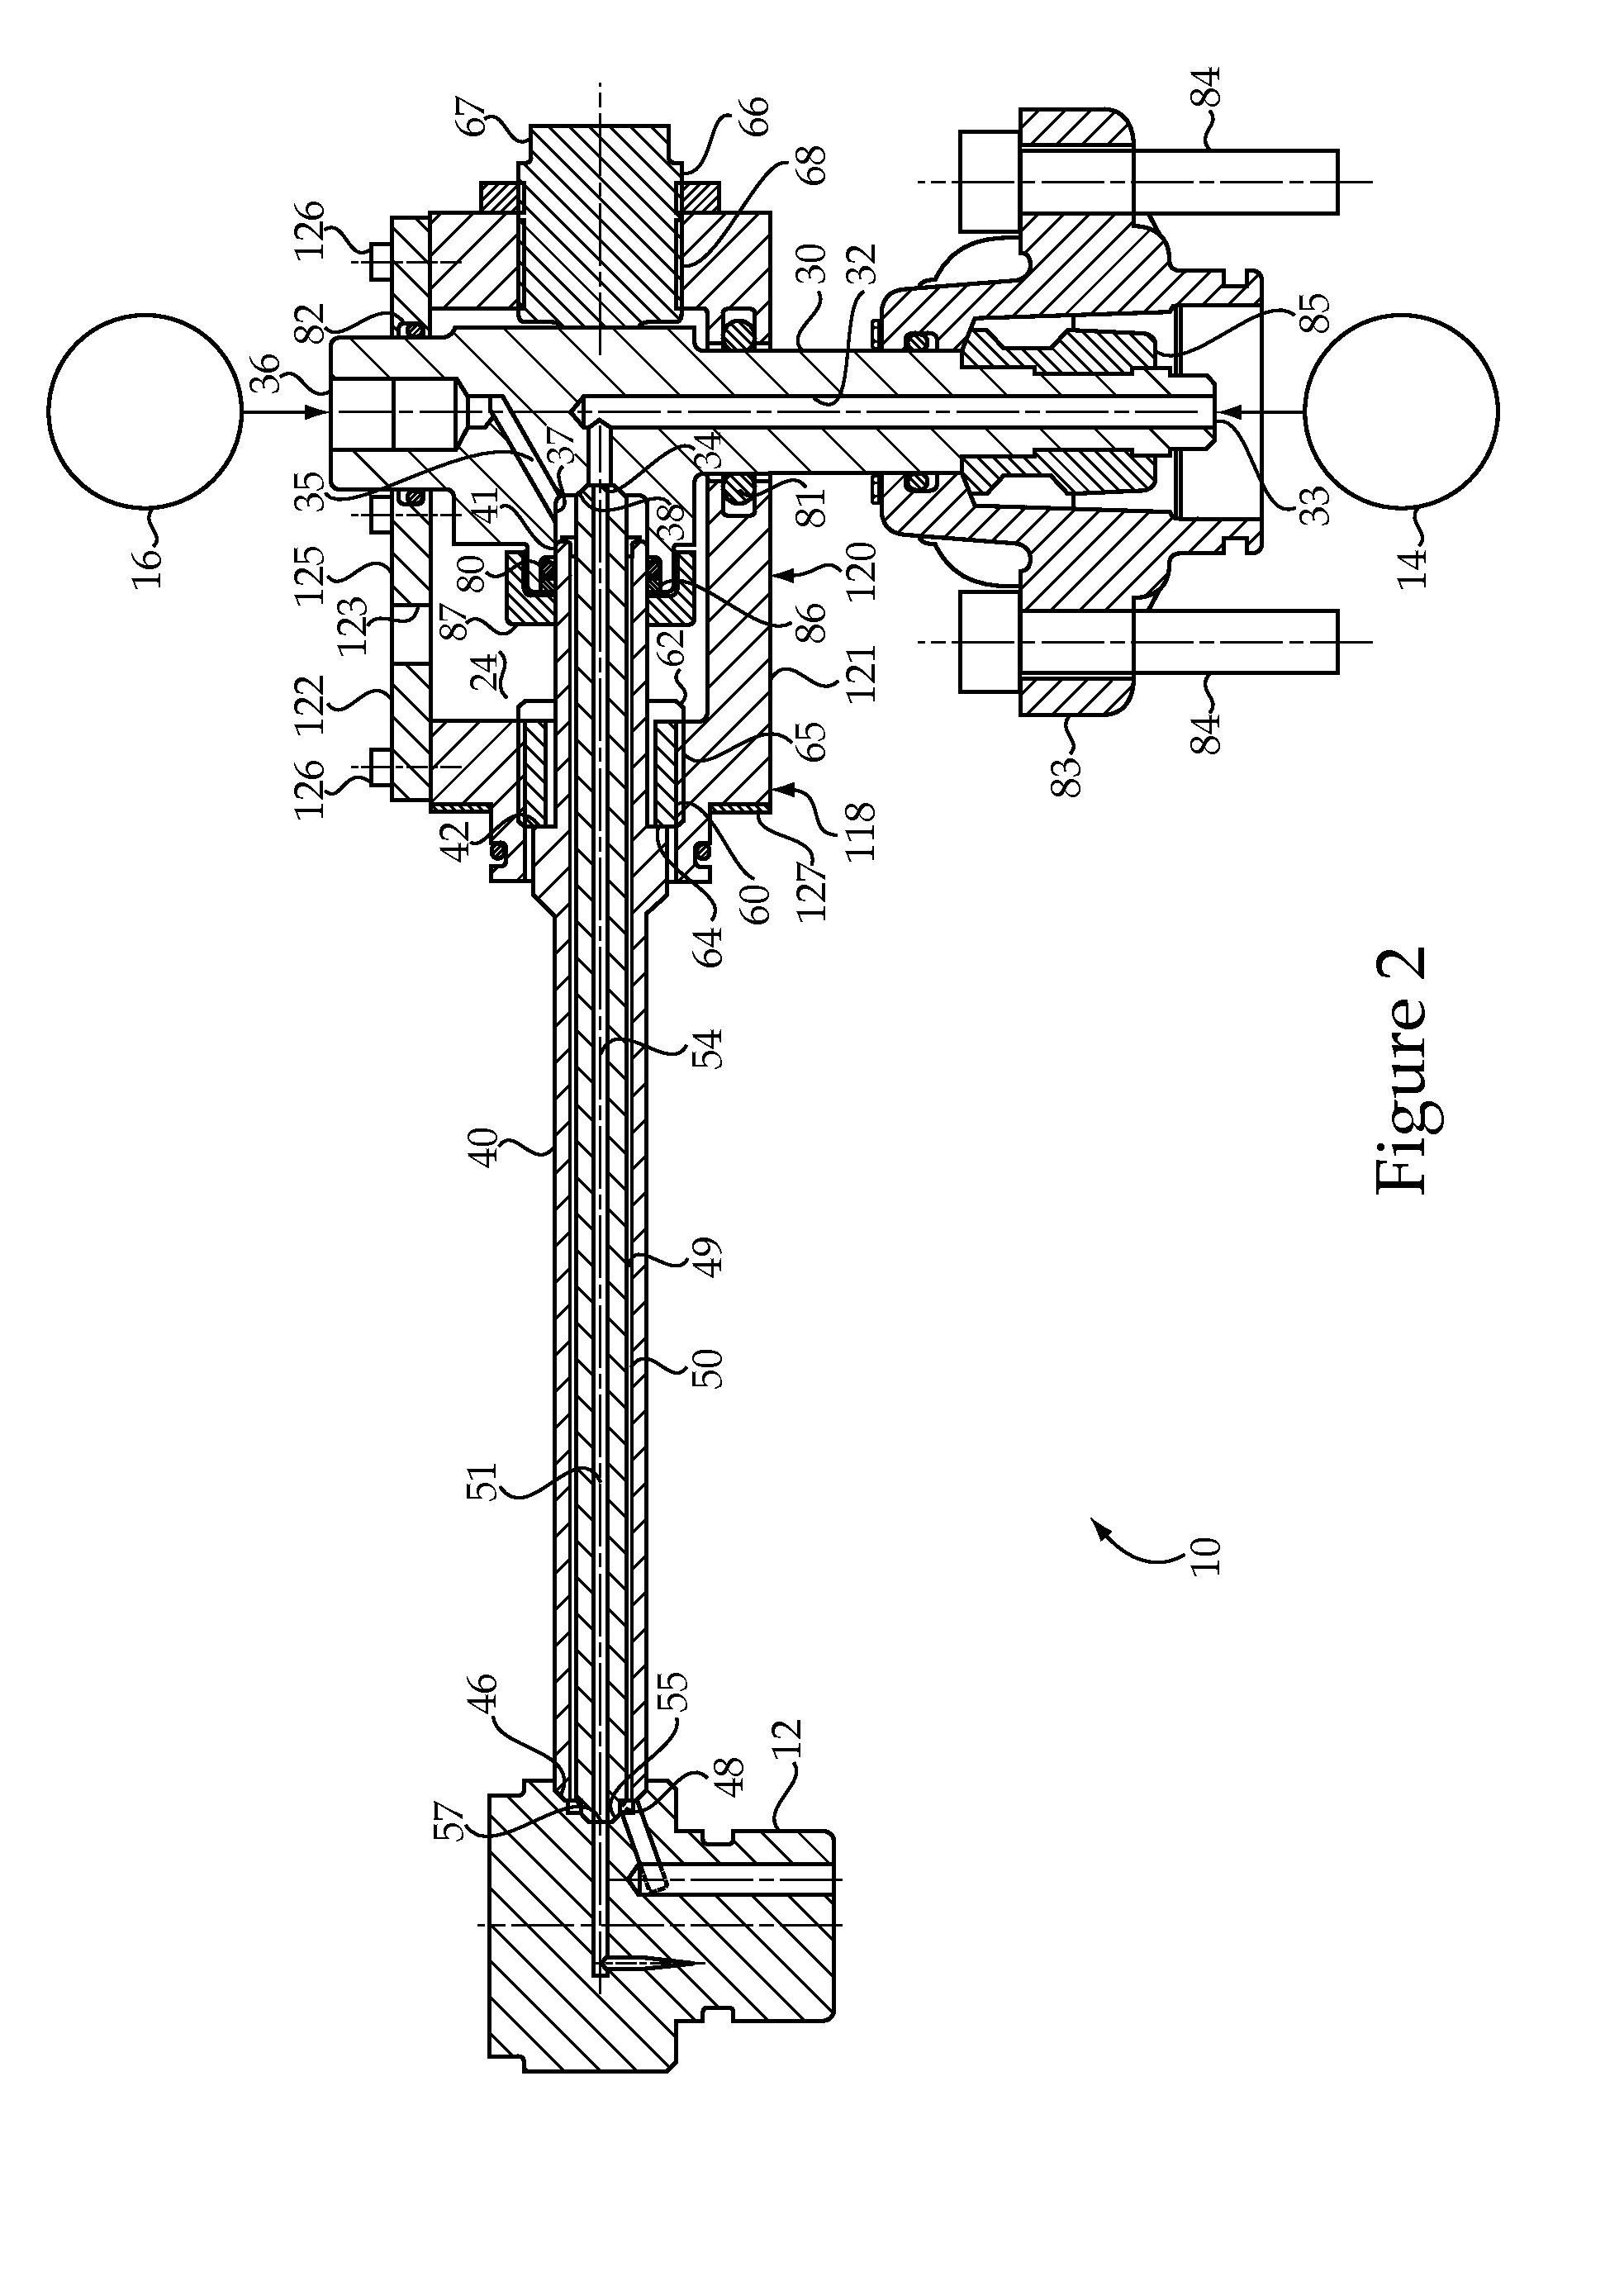 Dual Fuel Injection Compression Ignition Engine And Method Of Operating Same